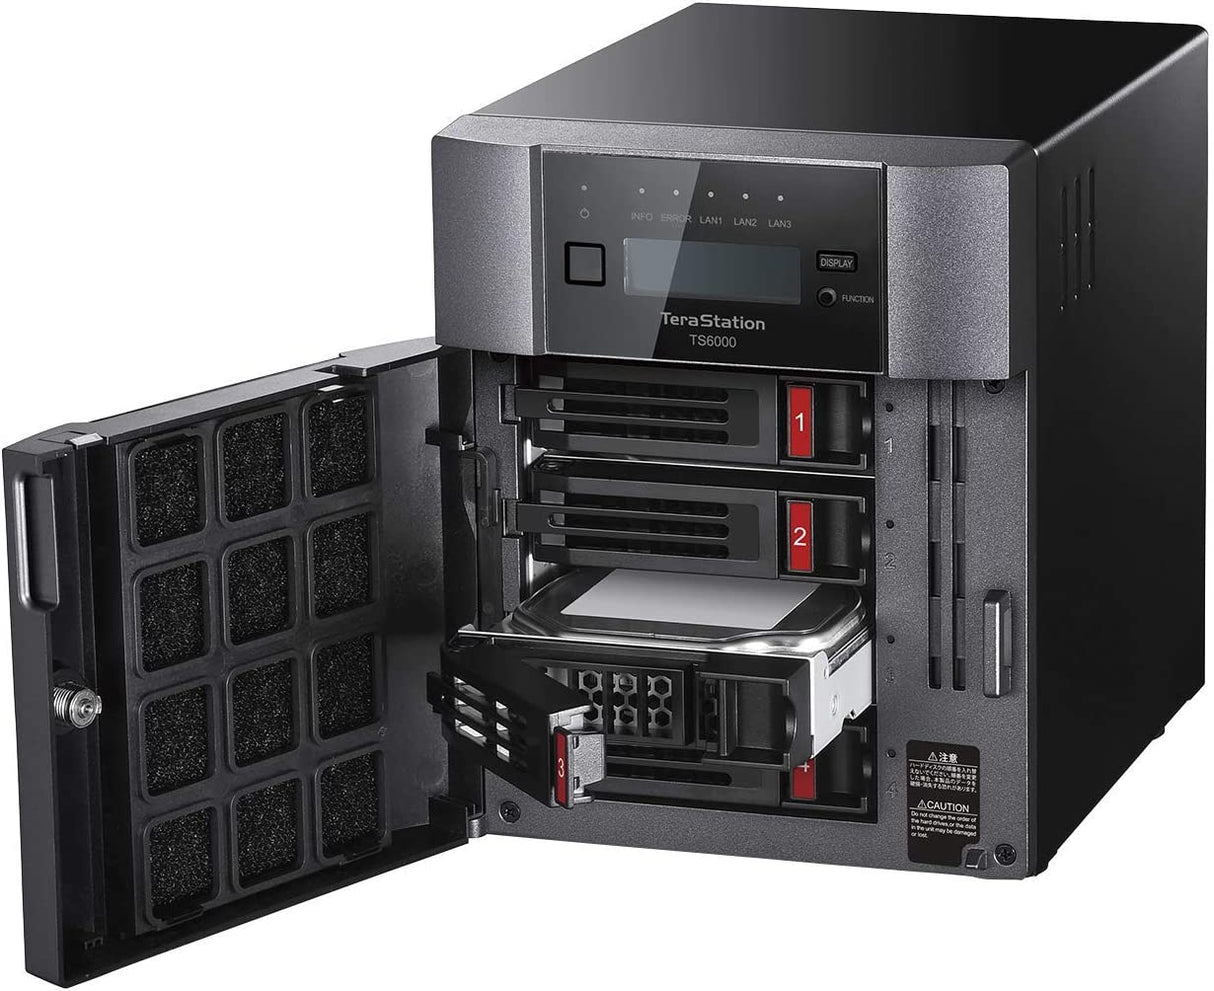 BUFFALO TeraStation 6400DN 32TB (4x8TB) Desktop NAS with HDD Included + Snapshot Protection Against Ransomware / 4 Bay / 10GbE / Storage Server / NAS Server / NAS Storage/ Network Storage/ File Server Desktop 4 Drive Bays 32 TB